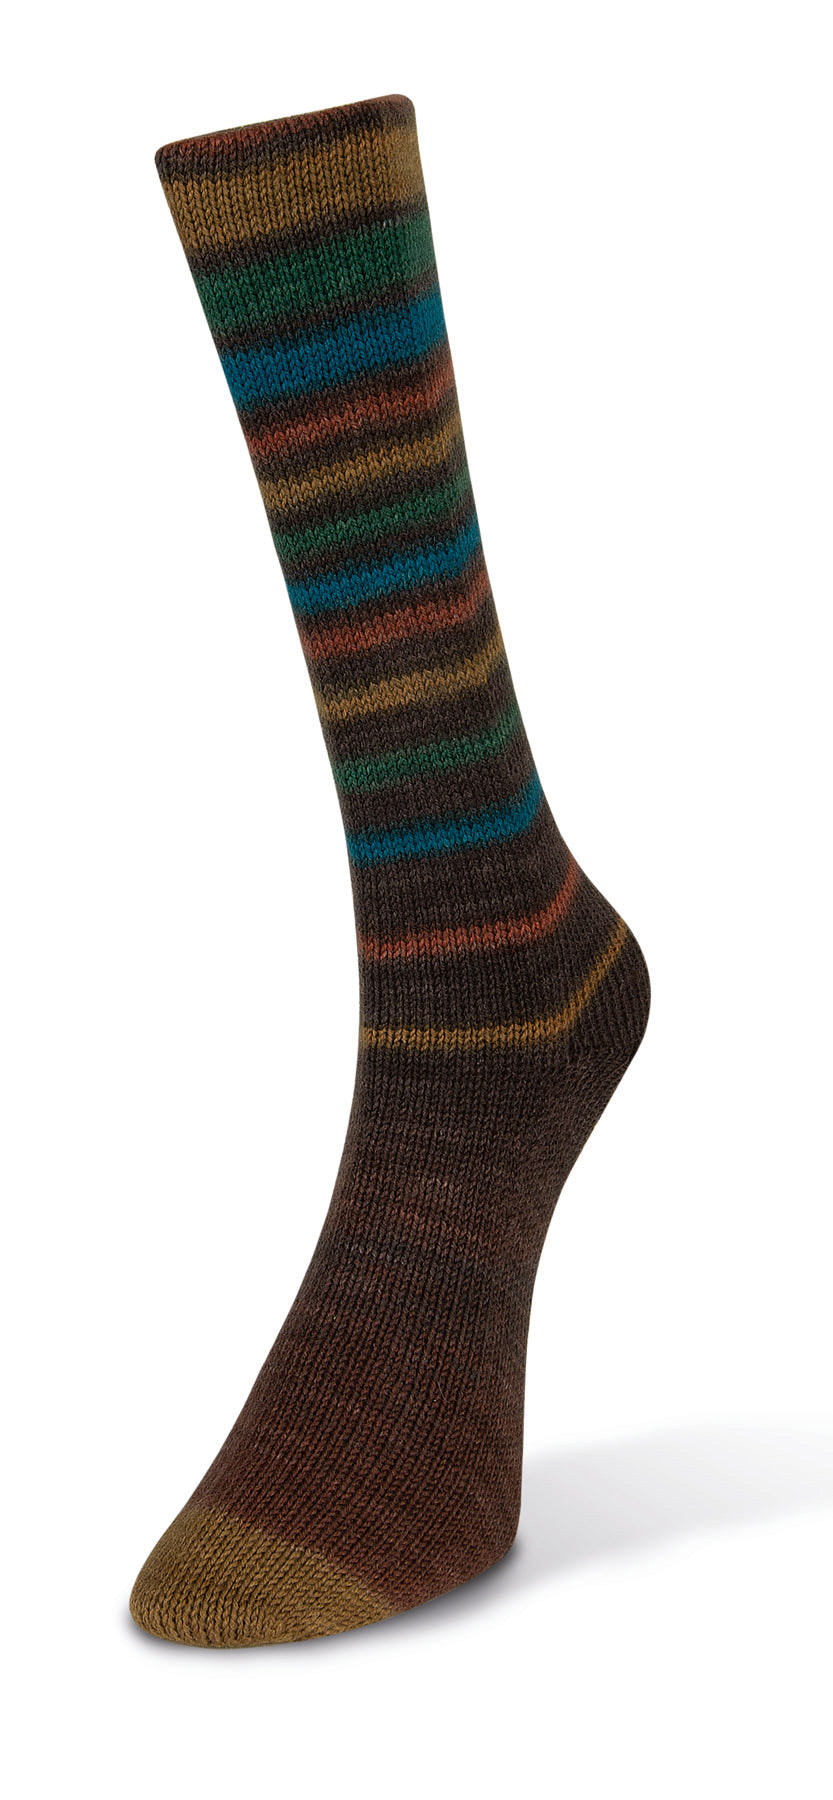 Laines de Nord Inifinity Sock color brown green blue red